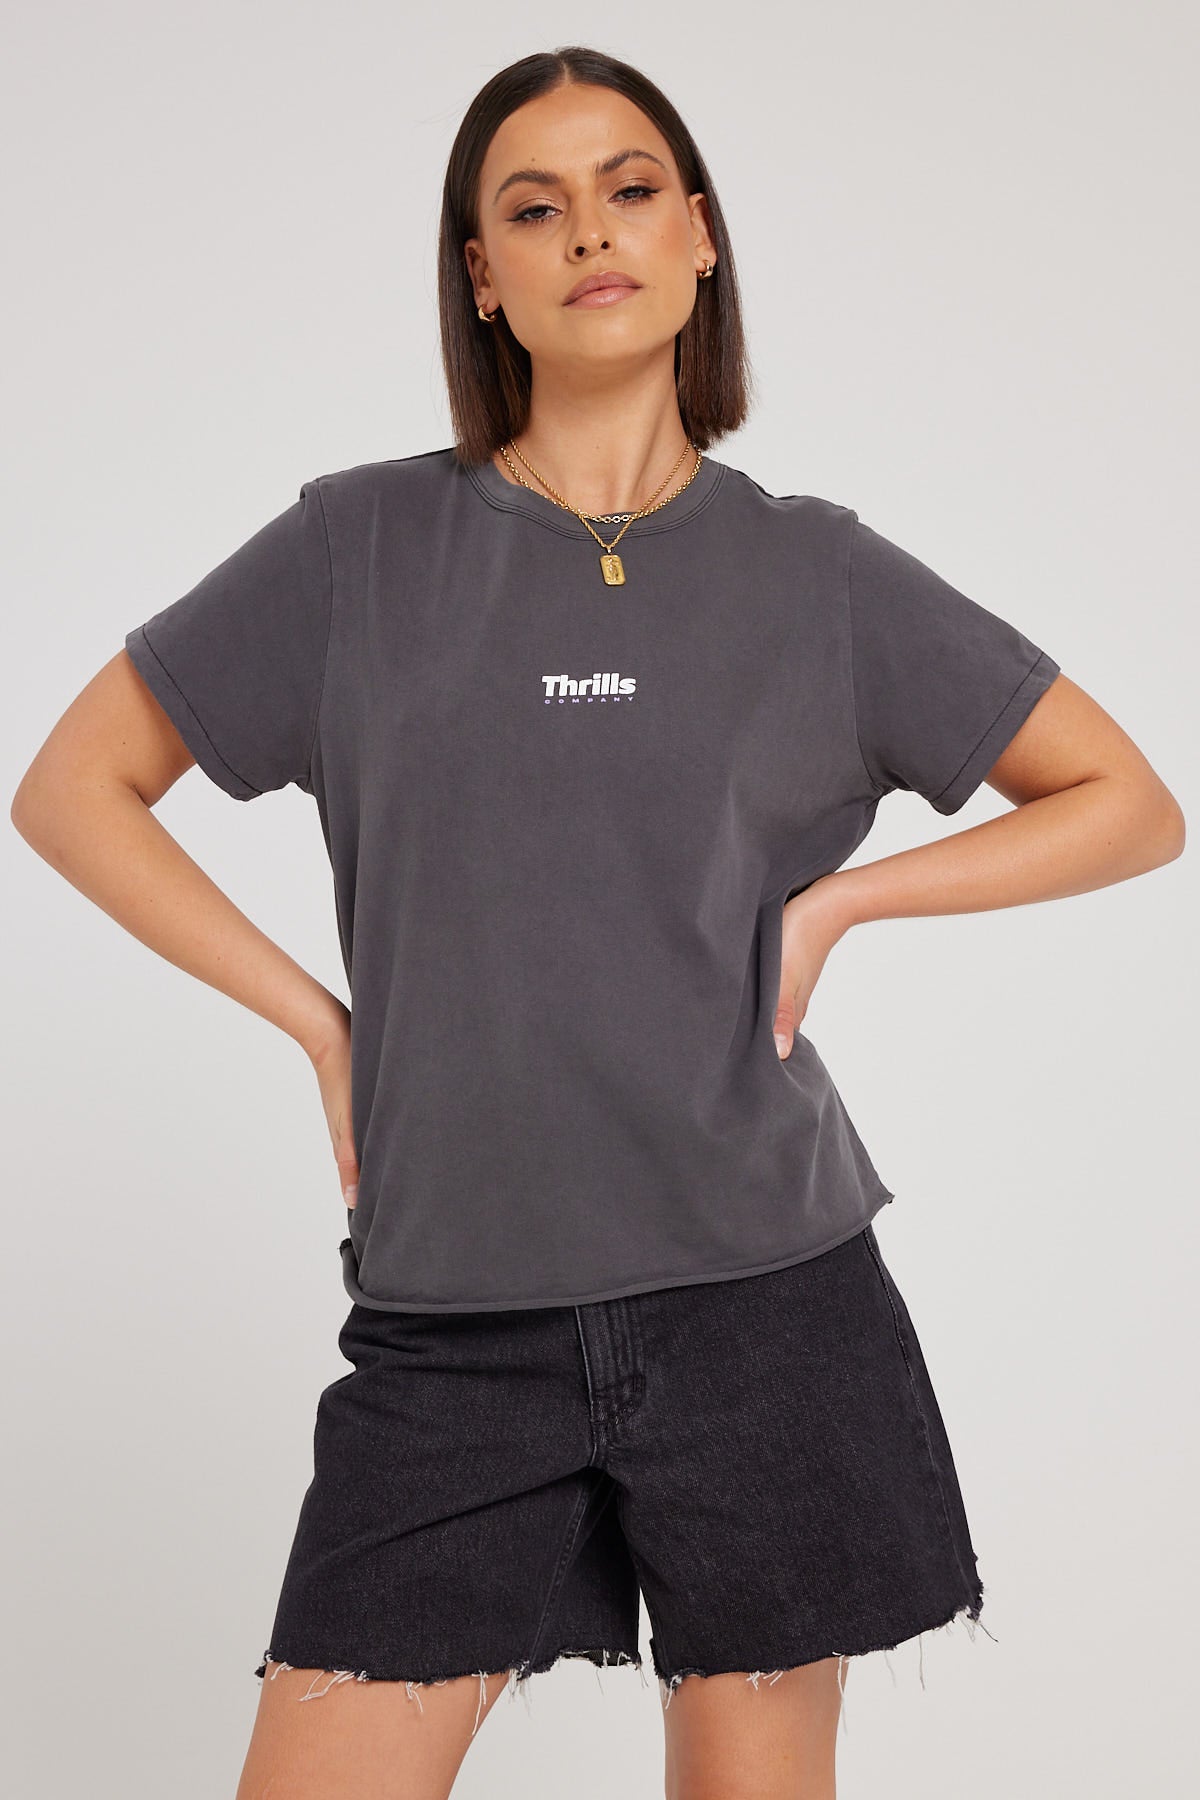 Thrills Paradox Relaxed Fit Tee Merch Black